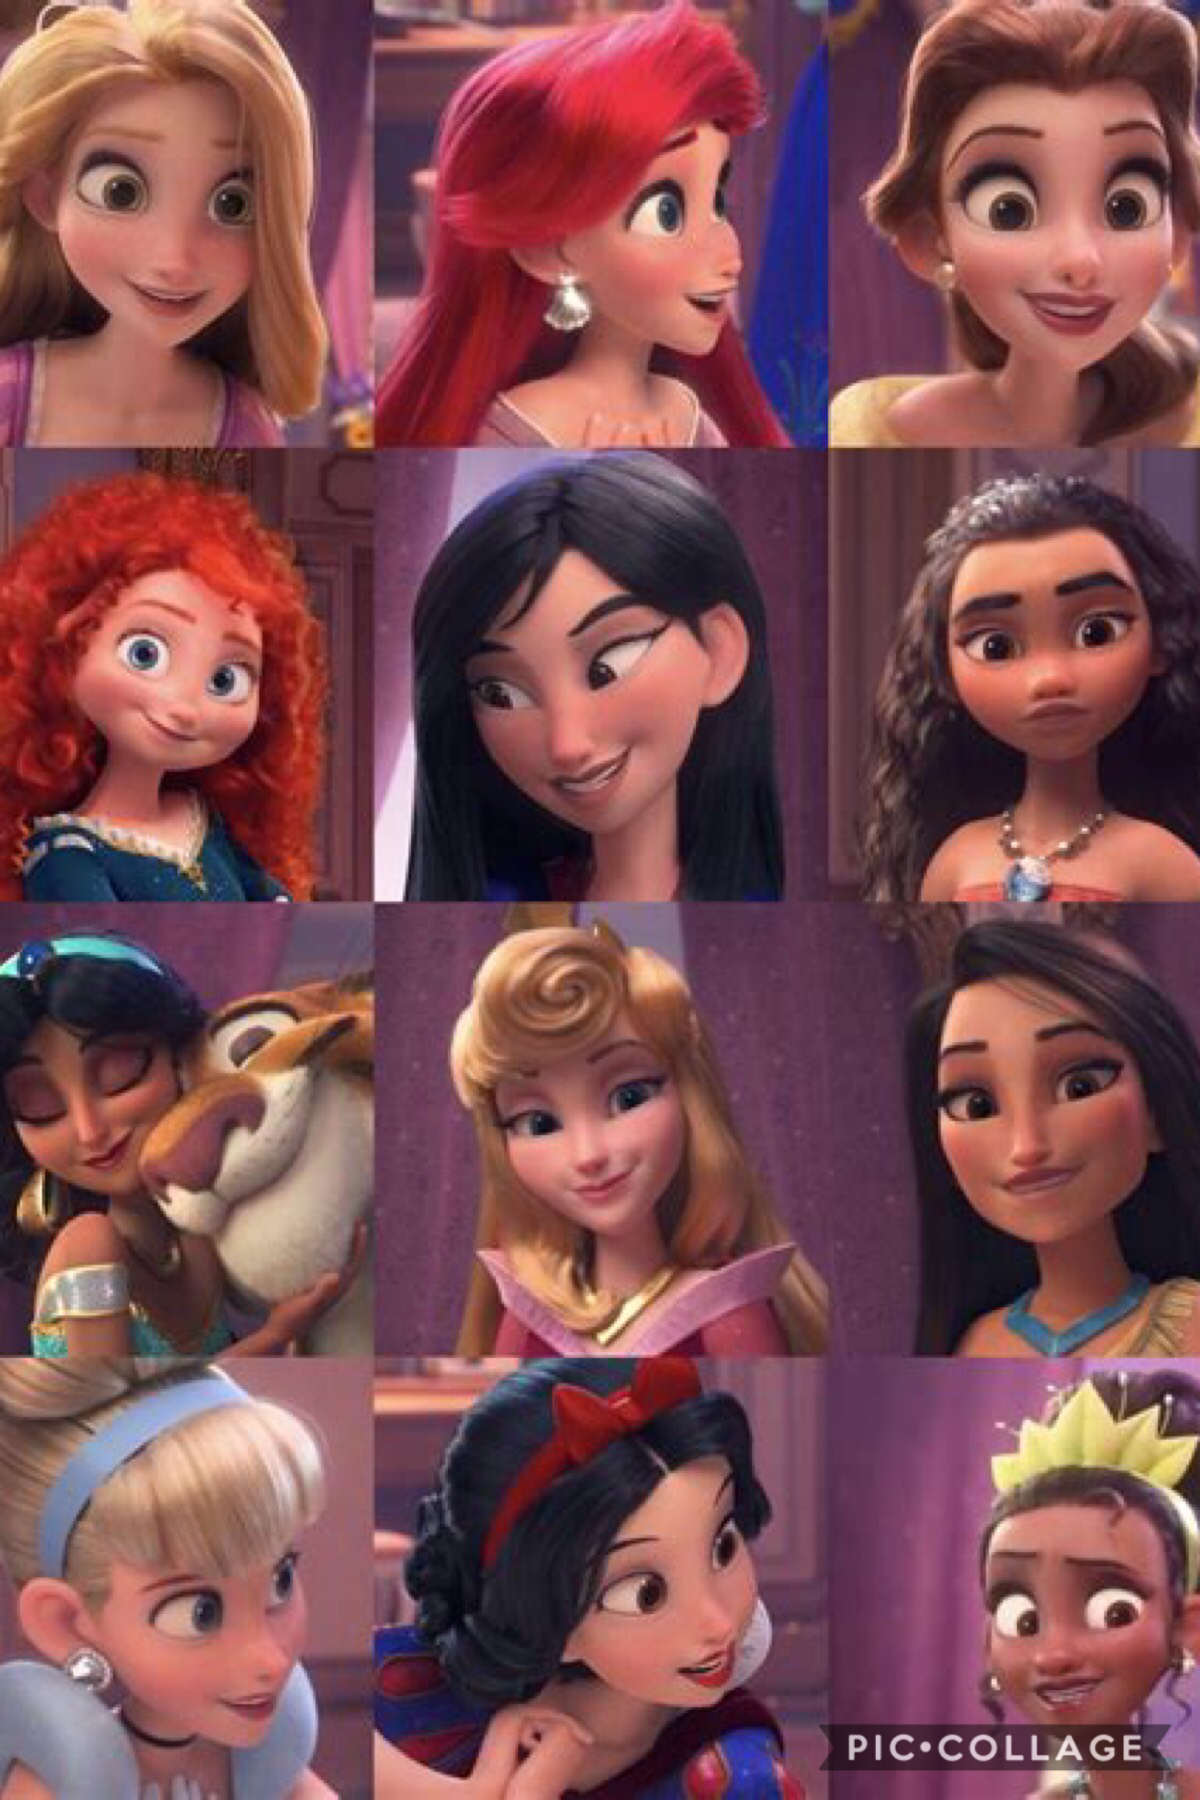 Who’s your favorite Disney princess? (Number them)